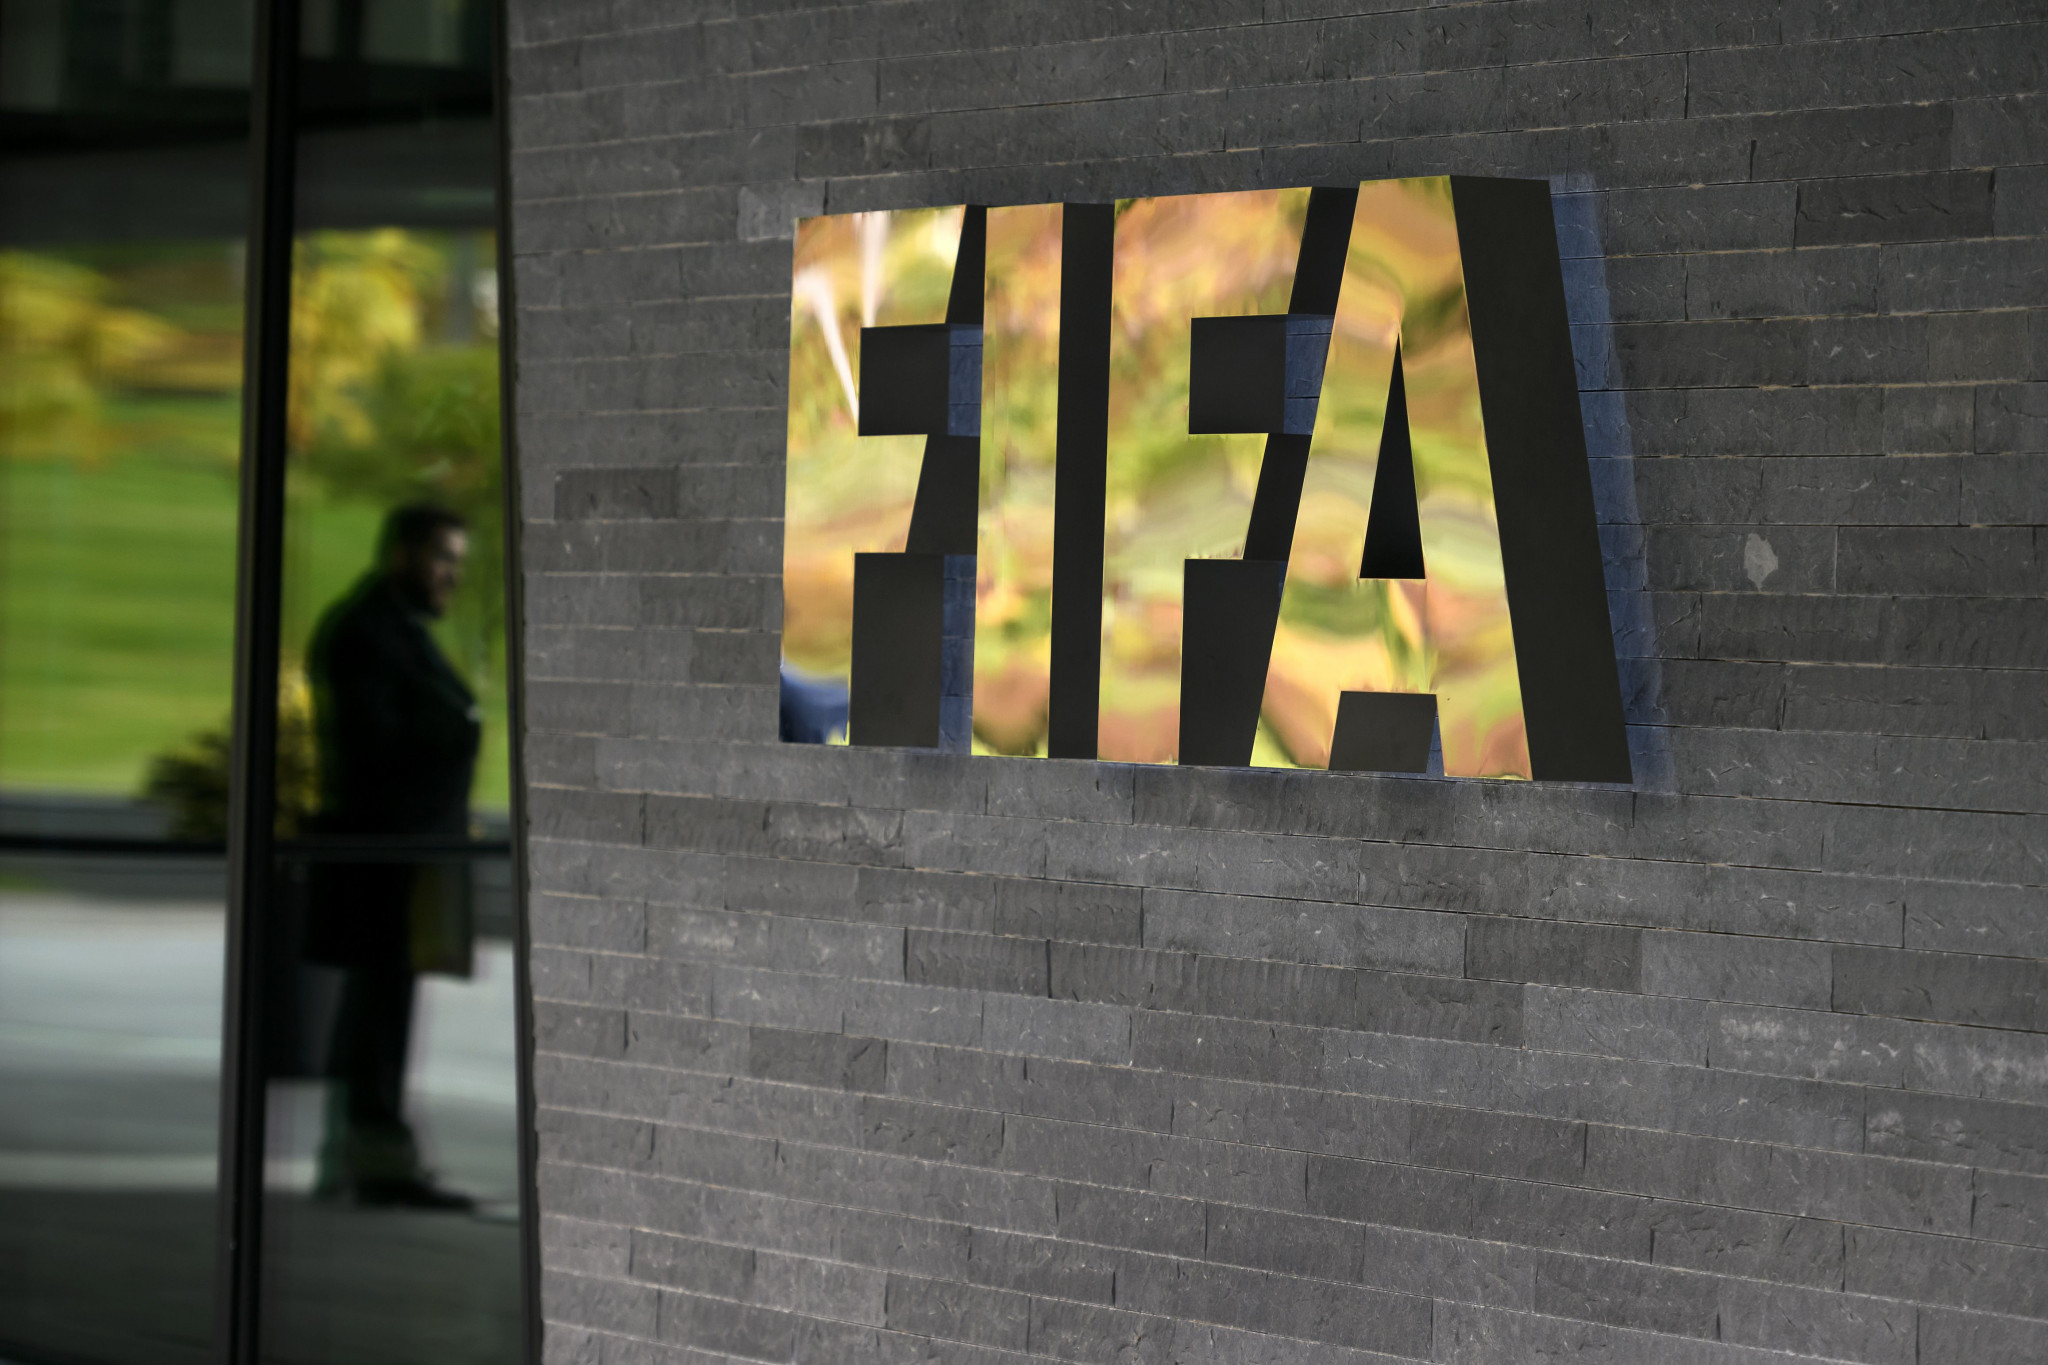 Israeli bank Hapoalim has admitted money laundering as part of a FIFA corruption case dating back to 2015 ©Getty Images